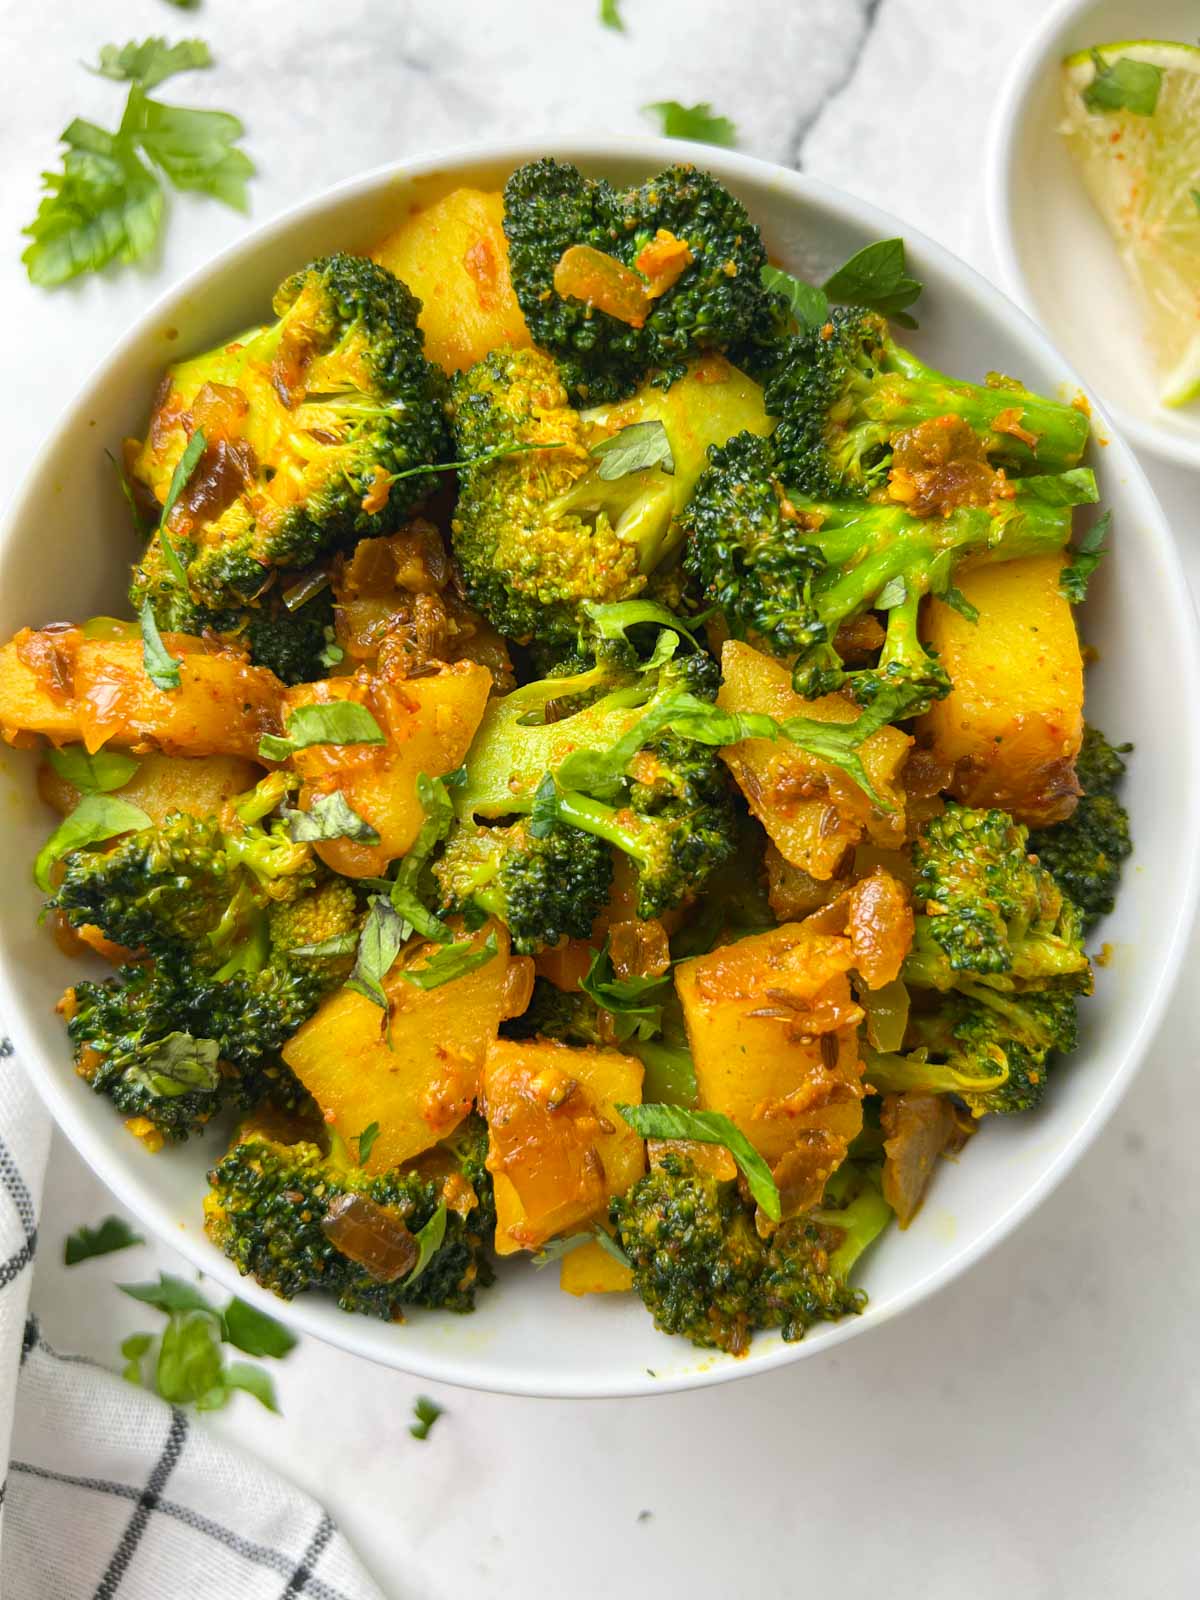 indian broccoli potato stir fry (aloo broccoli sabzi) served in a bowl with lime edge on the side